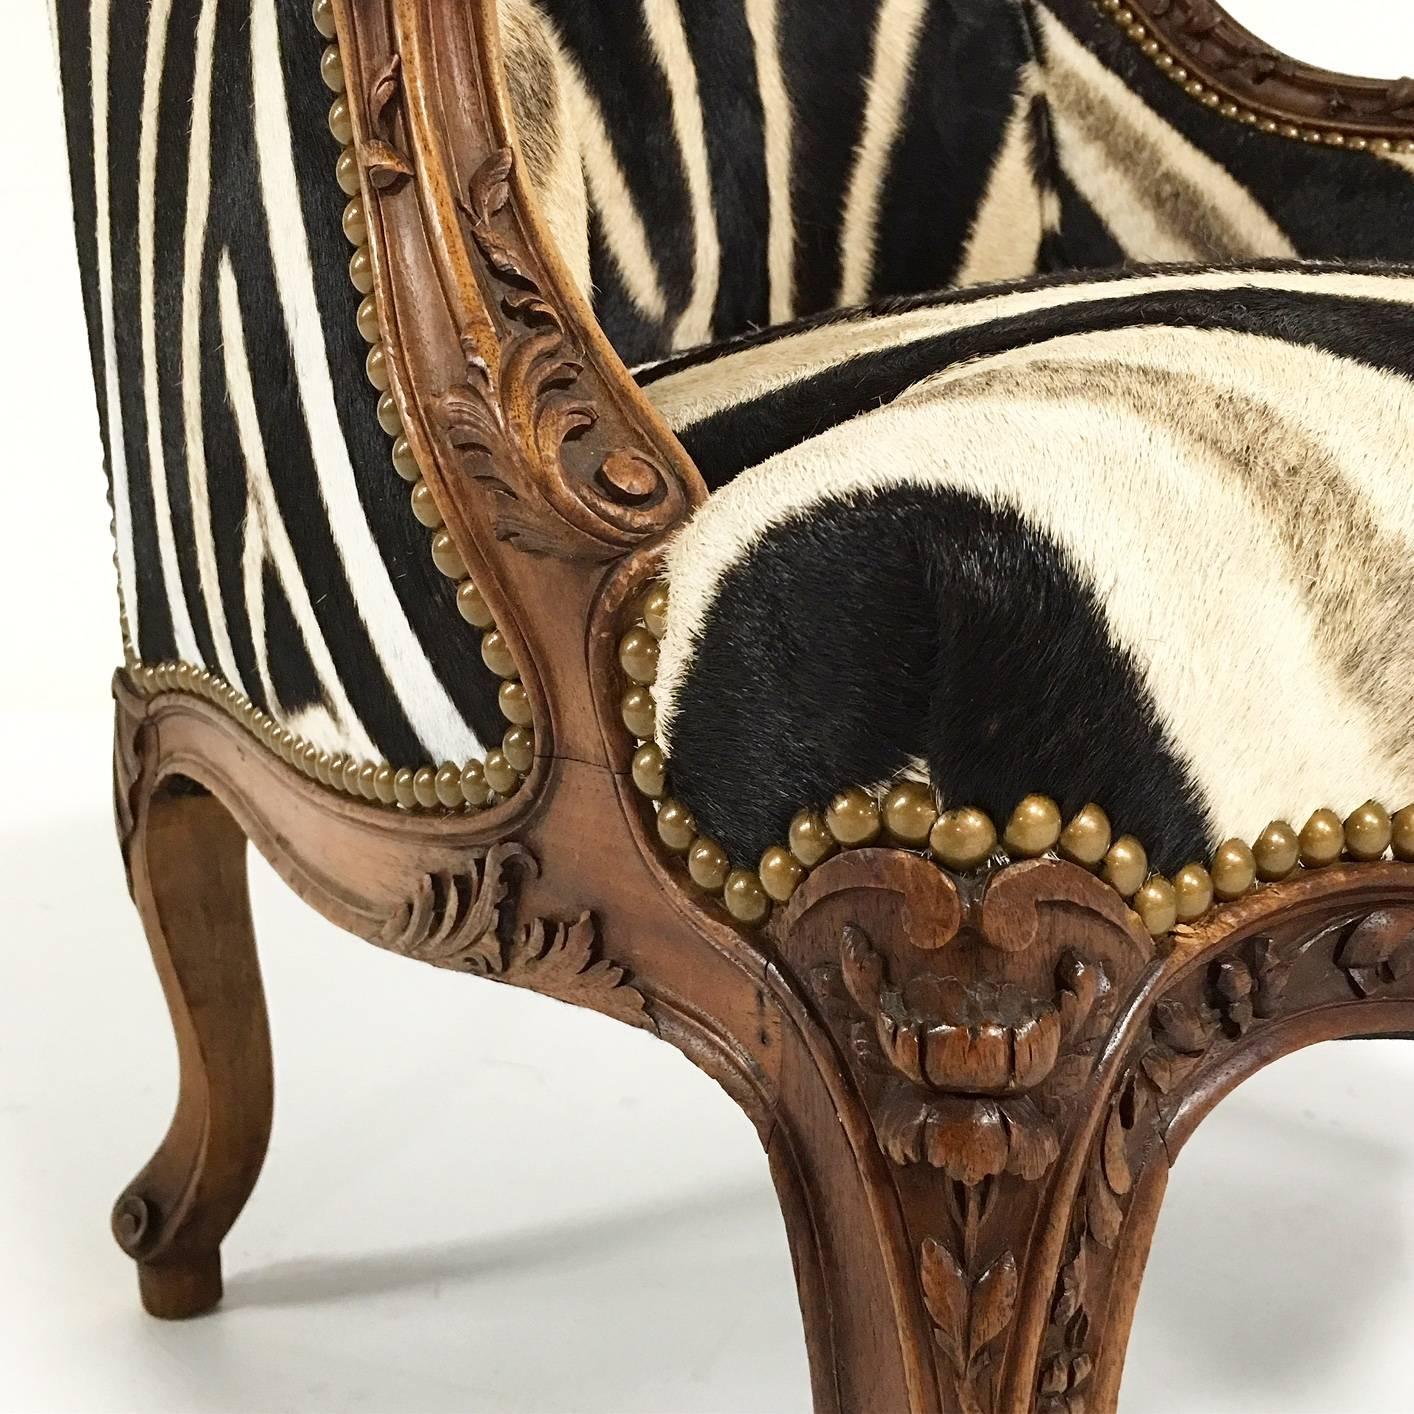 Small Vintage Carved Chair in Zebra Hide 1